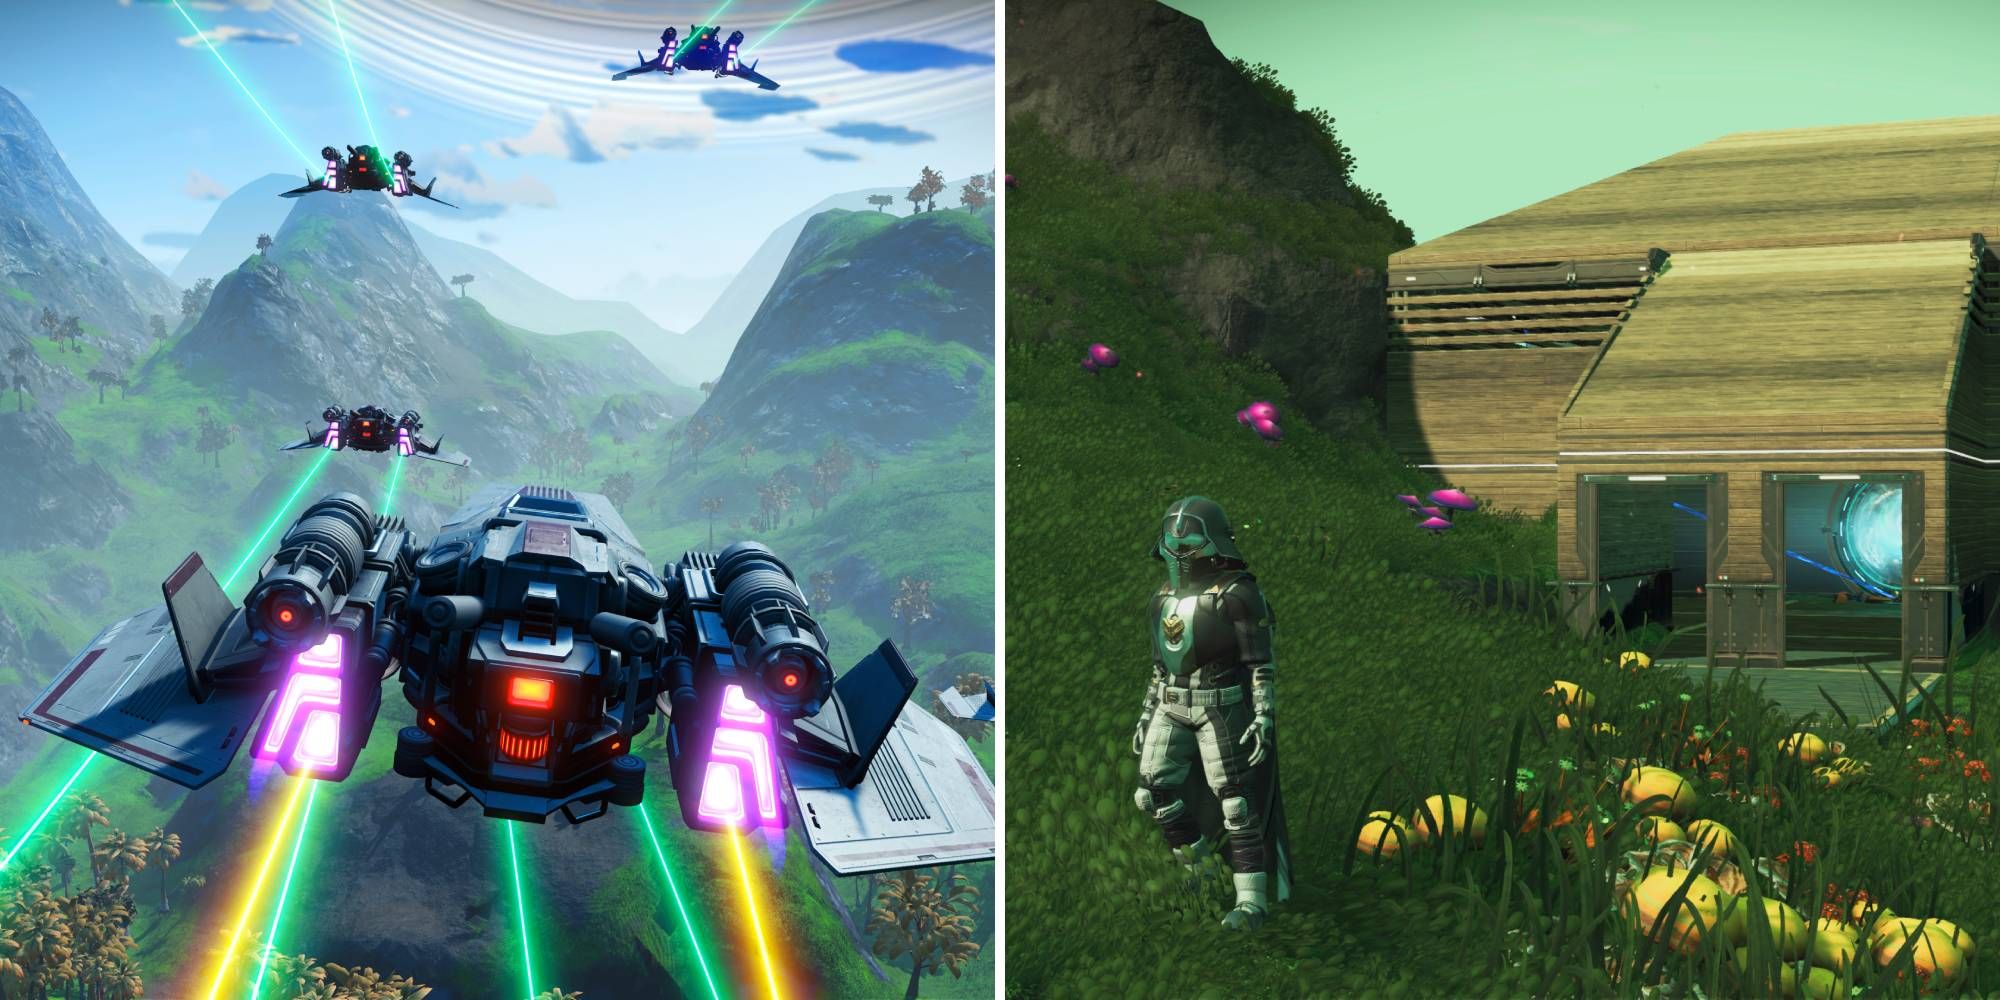 The Utopia Expedition Starship and a Traveler outside a base in No Man's Sky